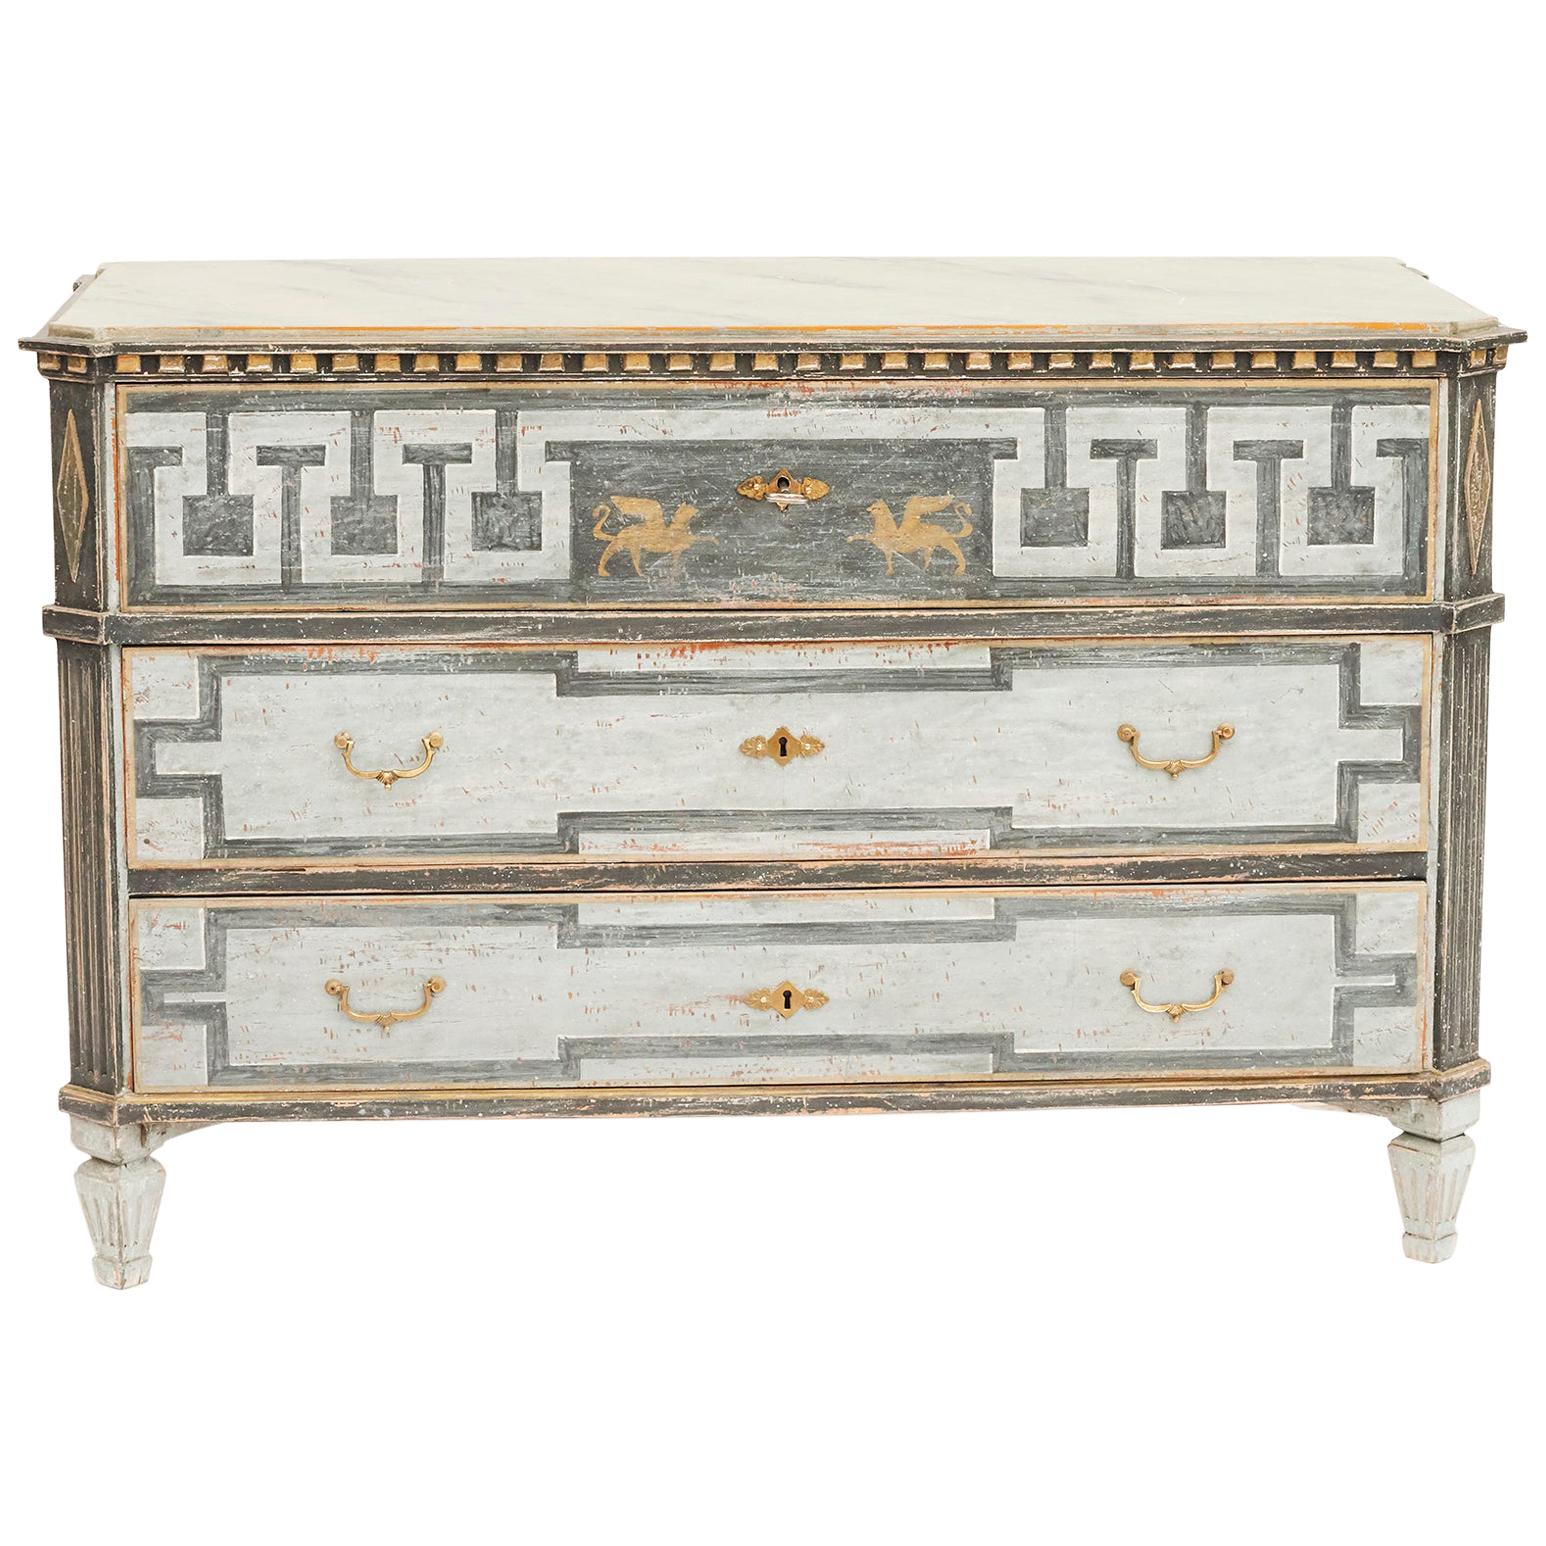 Mid-19th Century Swedish Chest of drawers Gustavian Style Painted in Blue Shades